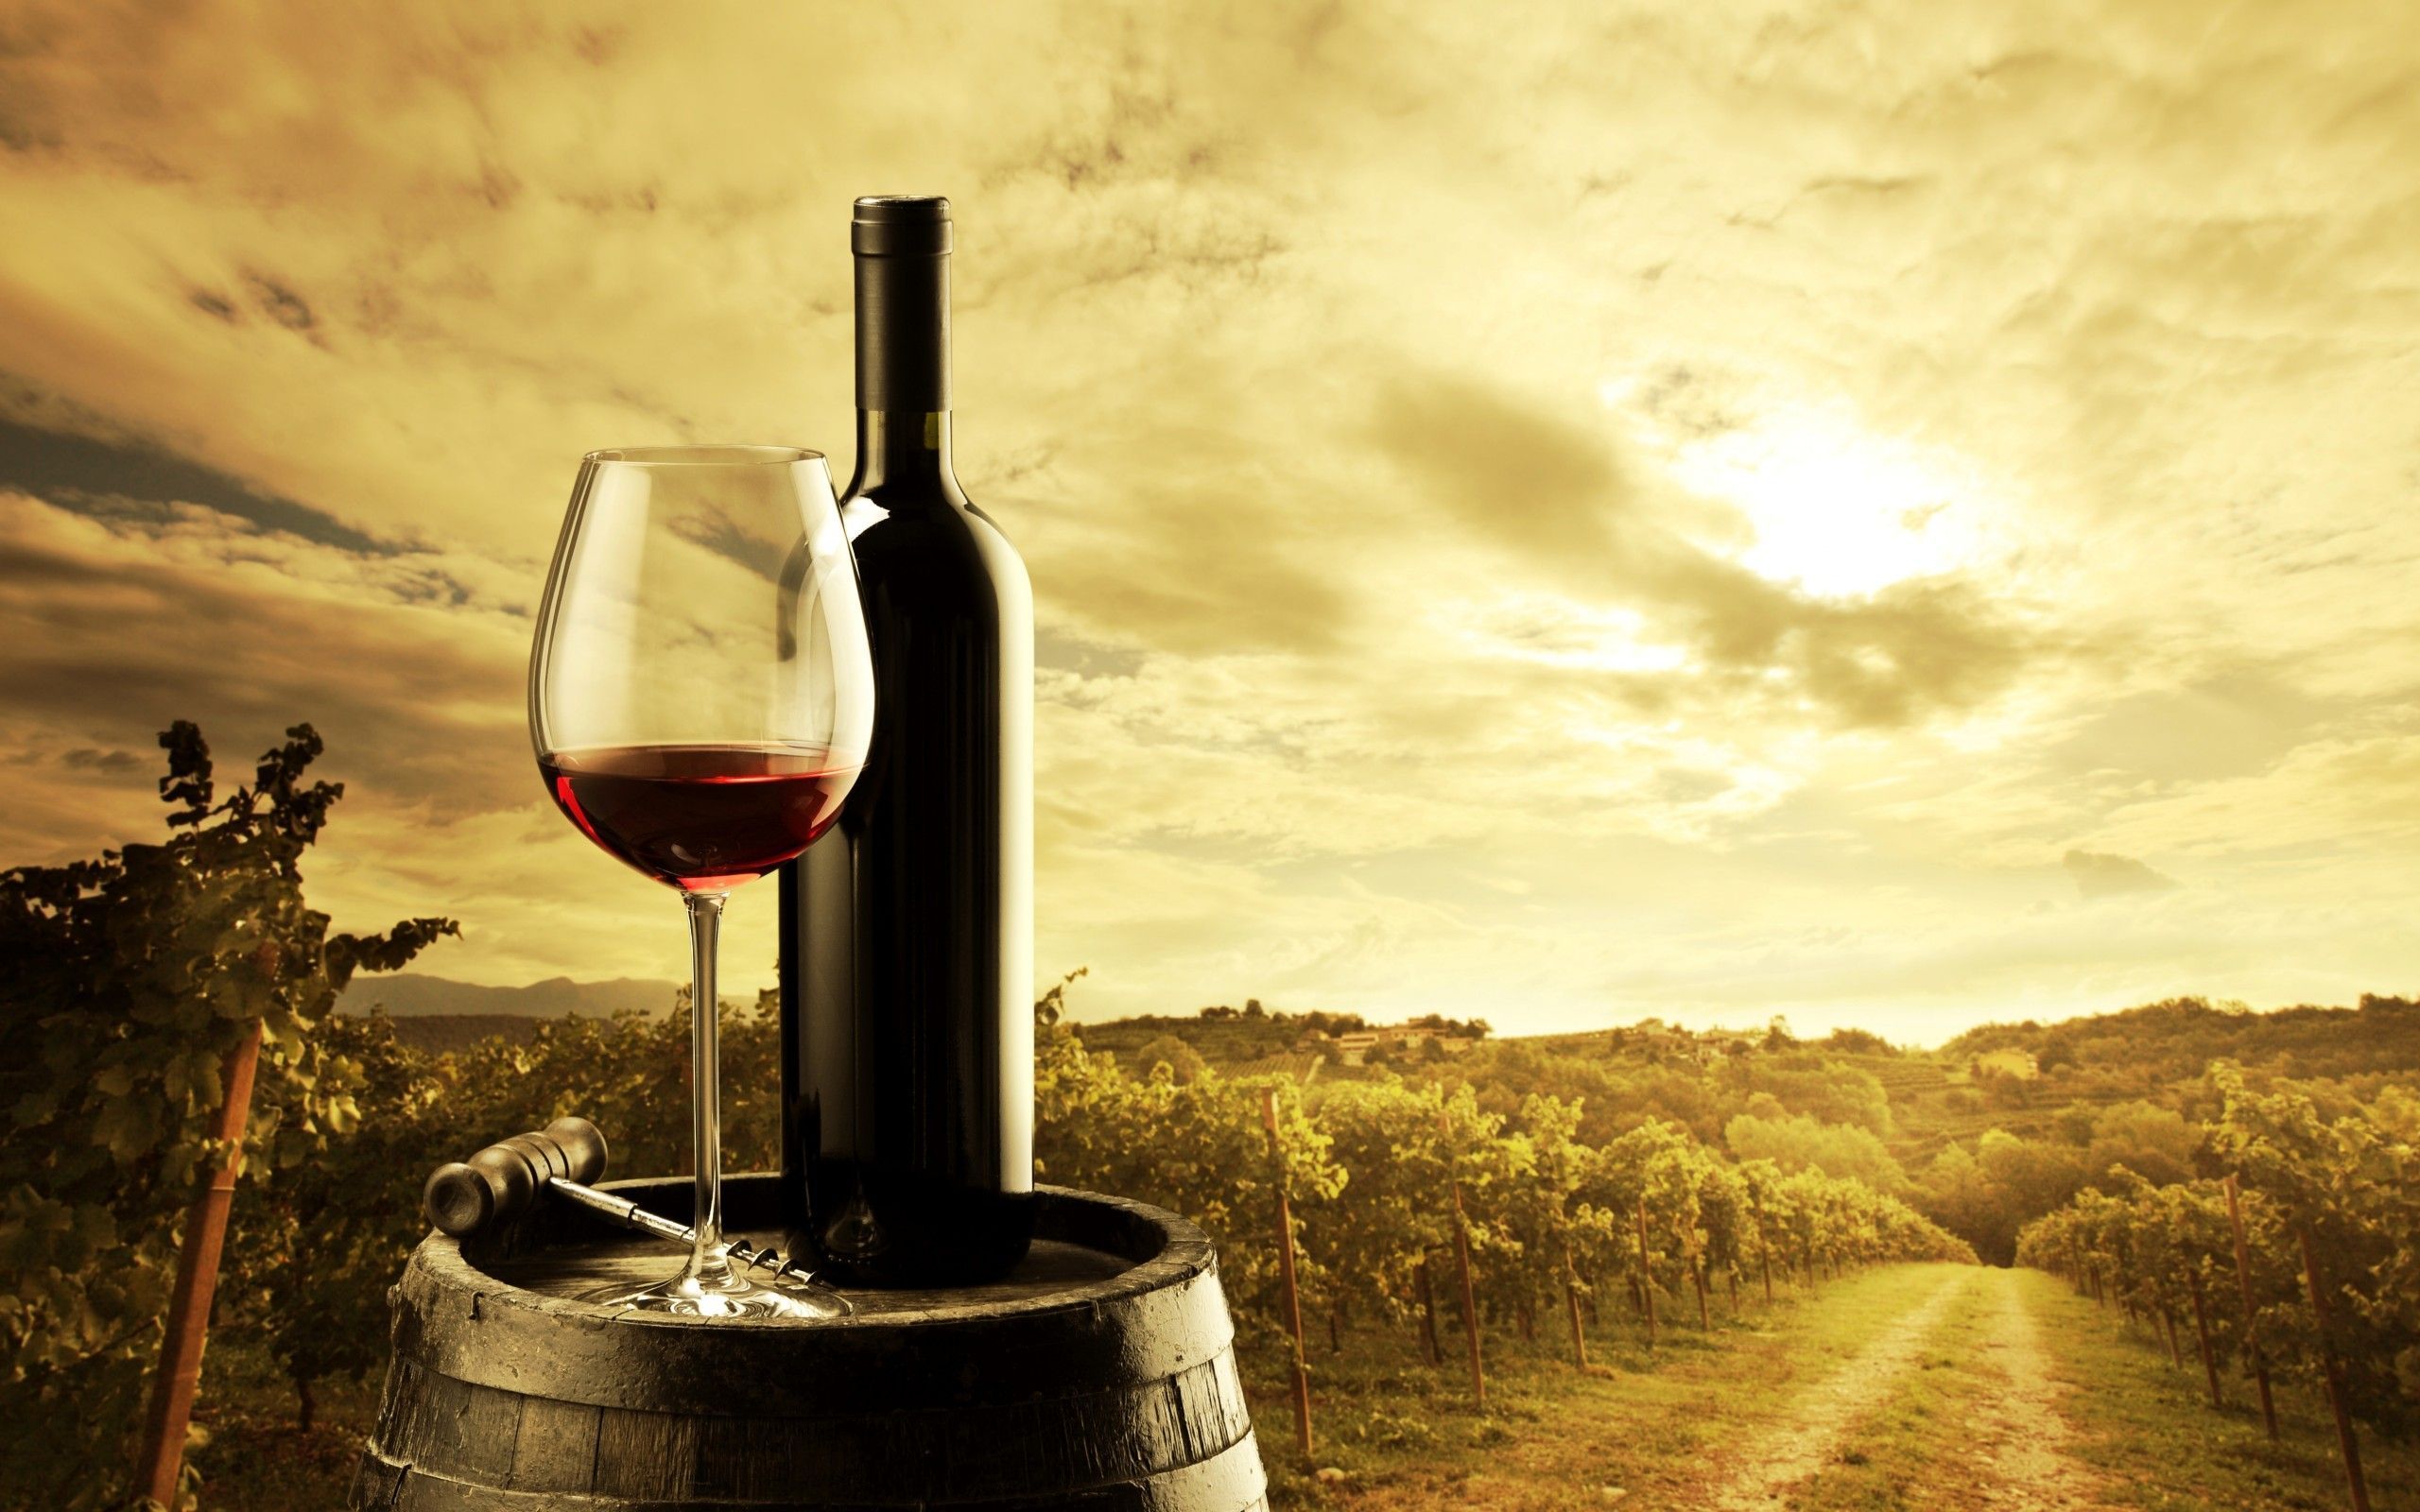 Wine HD Wallpaper, Wine Images, New Backgrounds